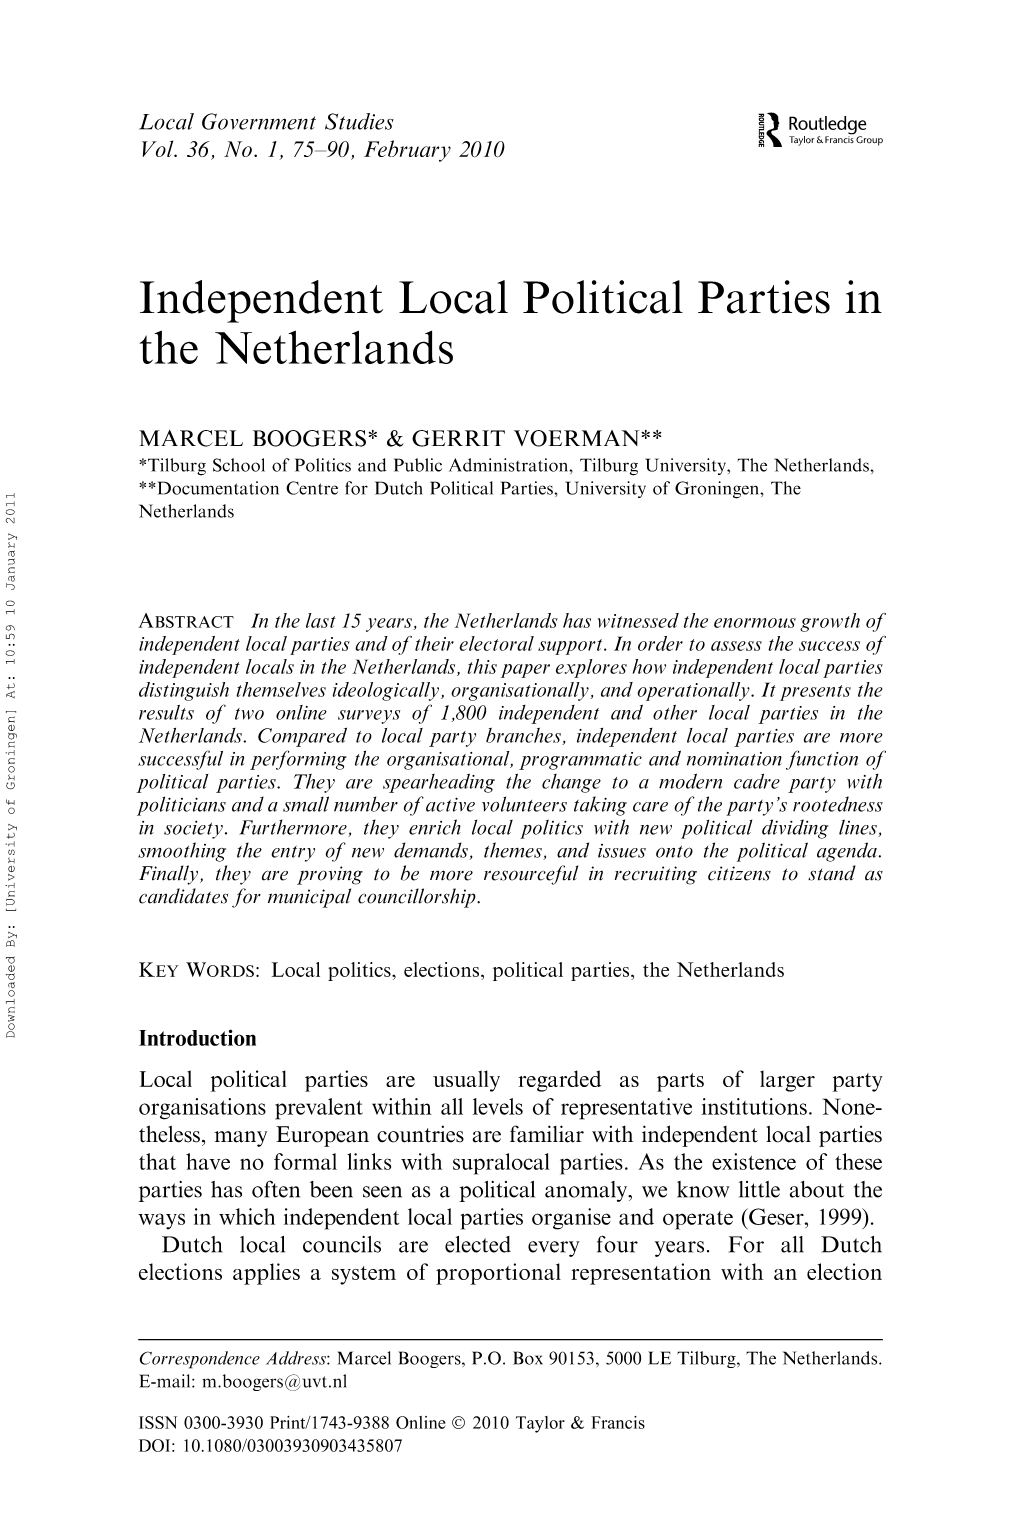 Independent Local Political Parties in the Netherlands